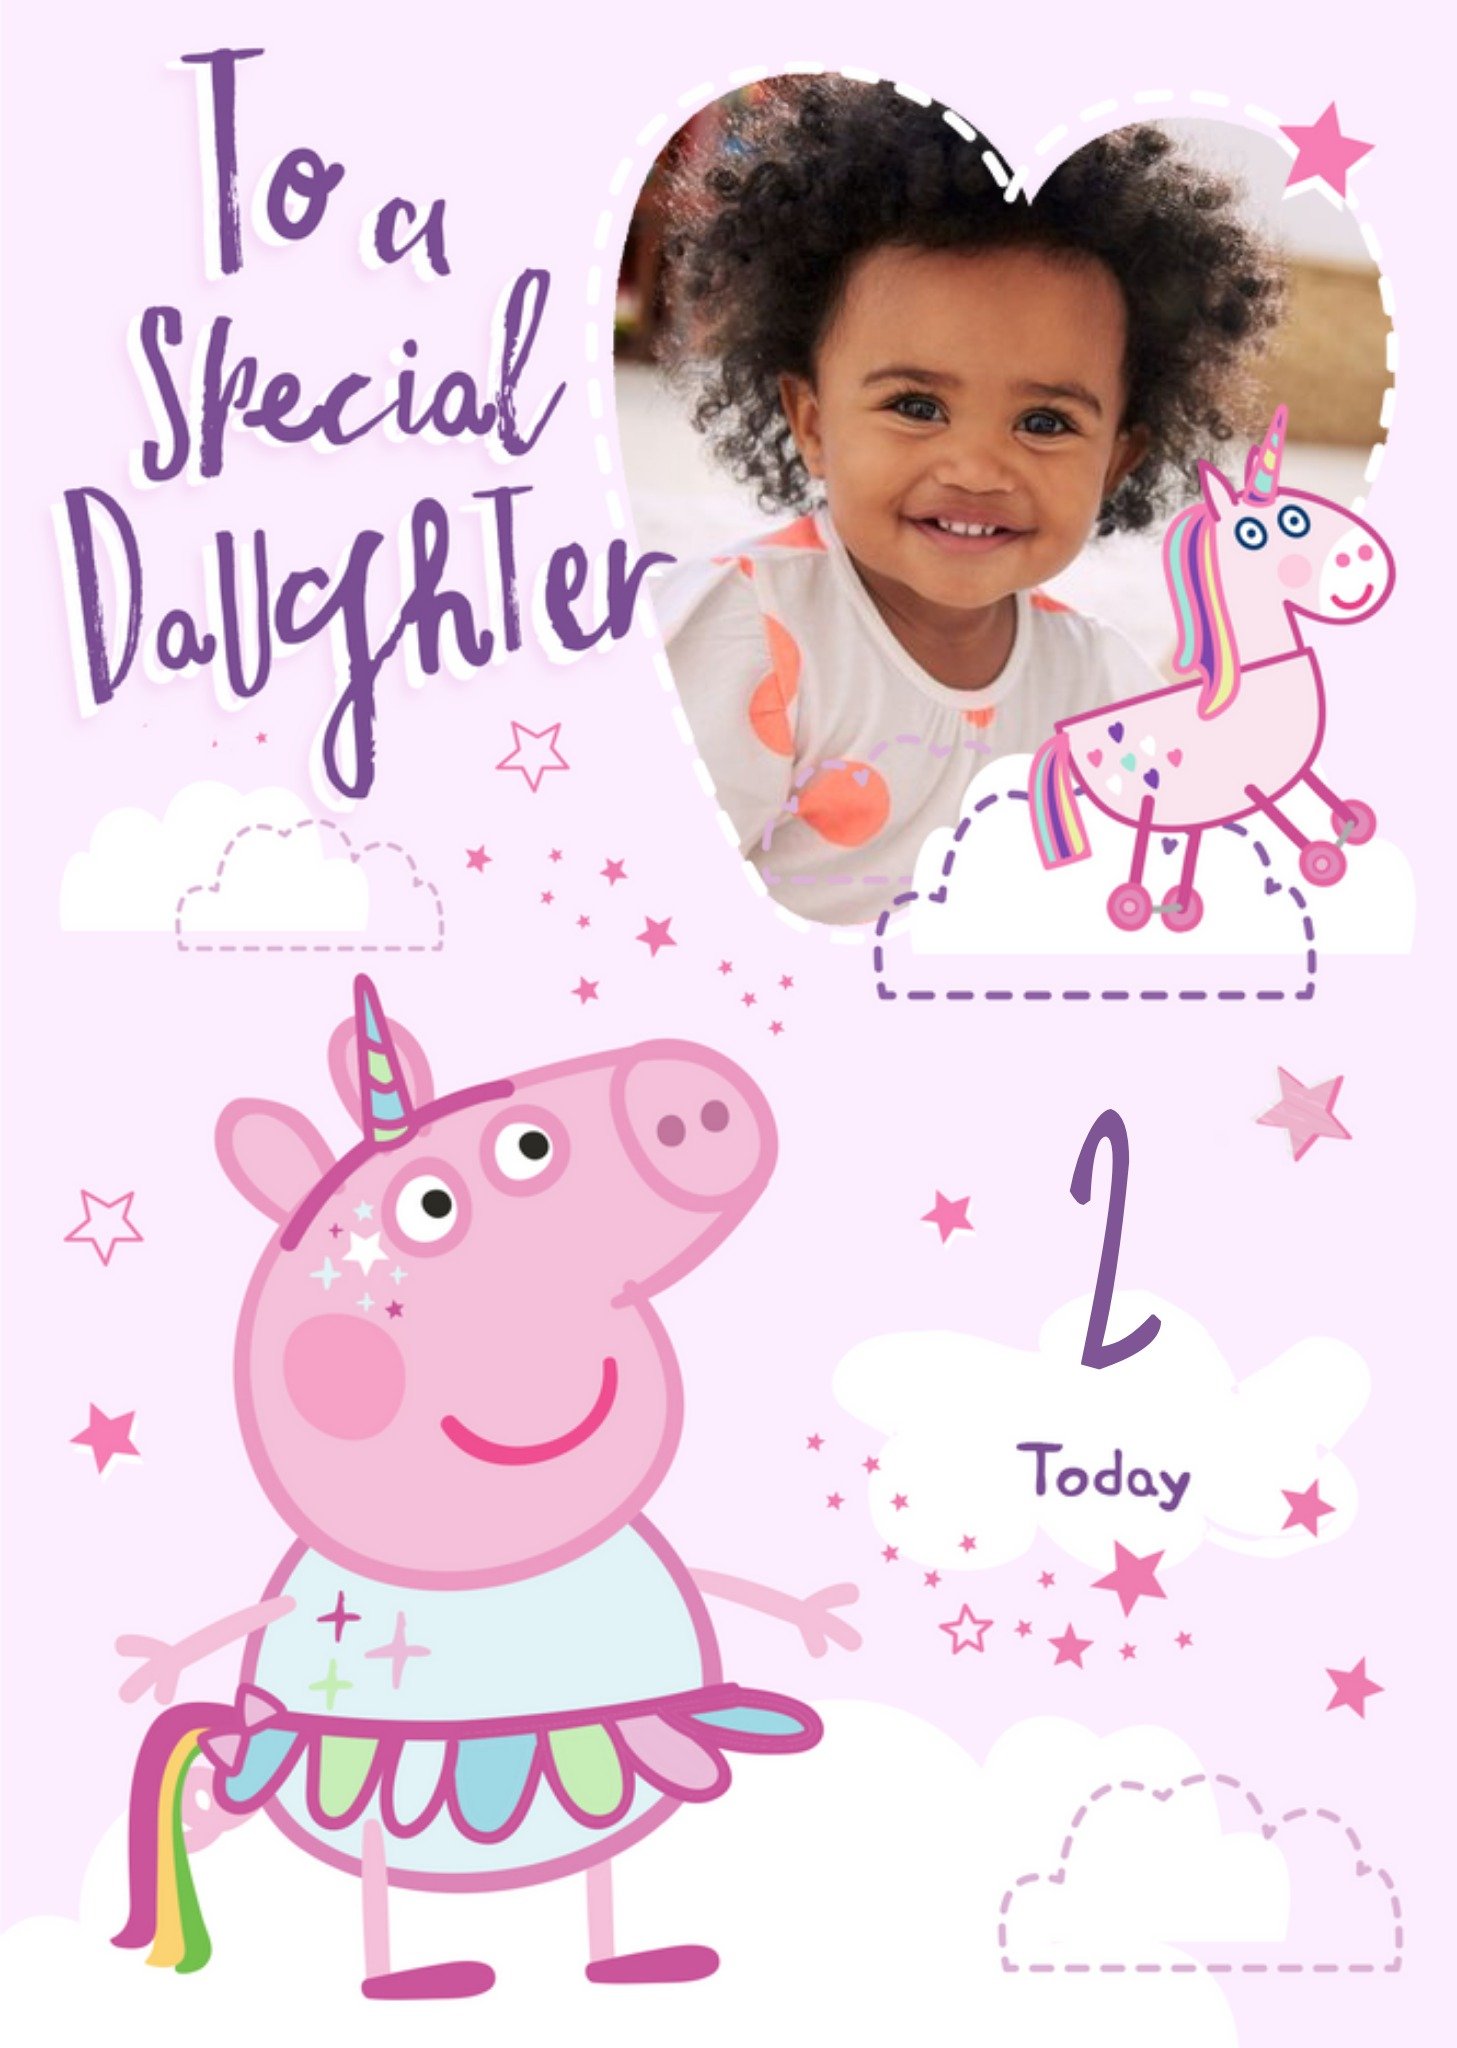 Peppa Pig Special Daughter Photo Upload Birthday Card, Large